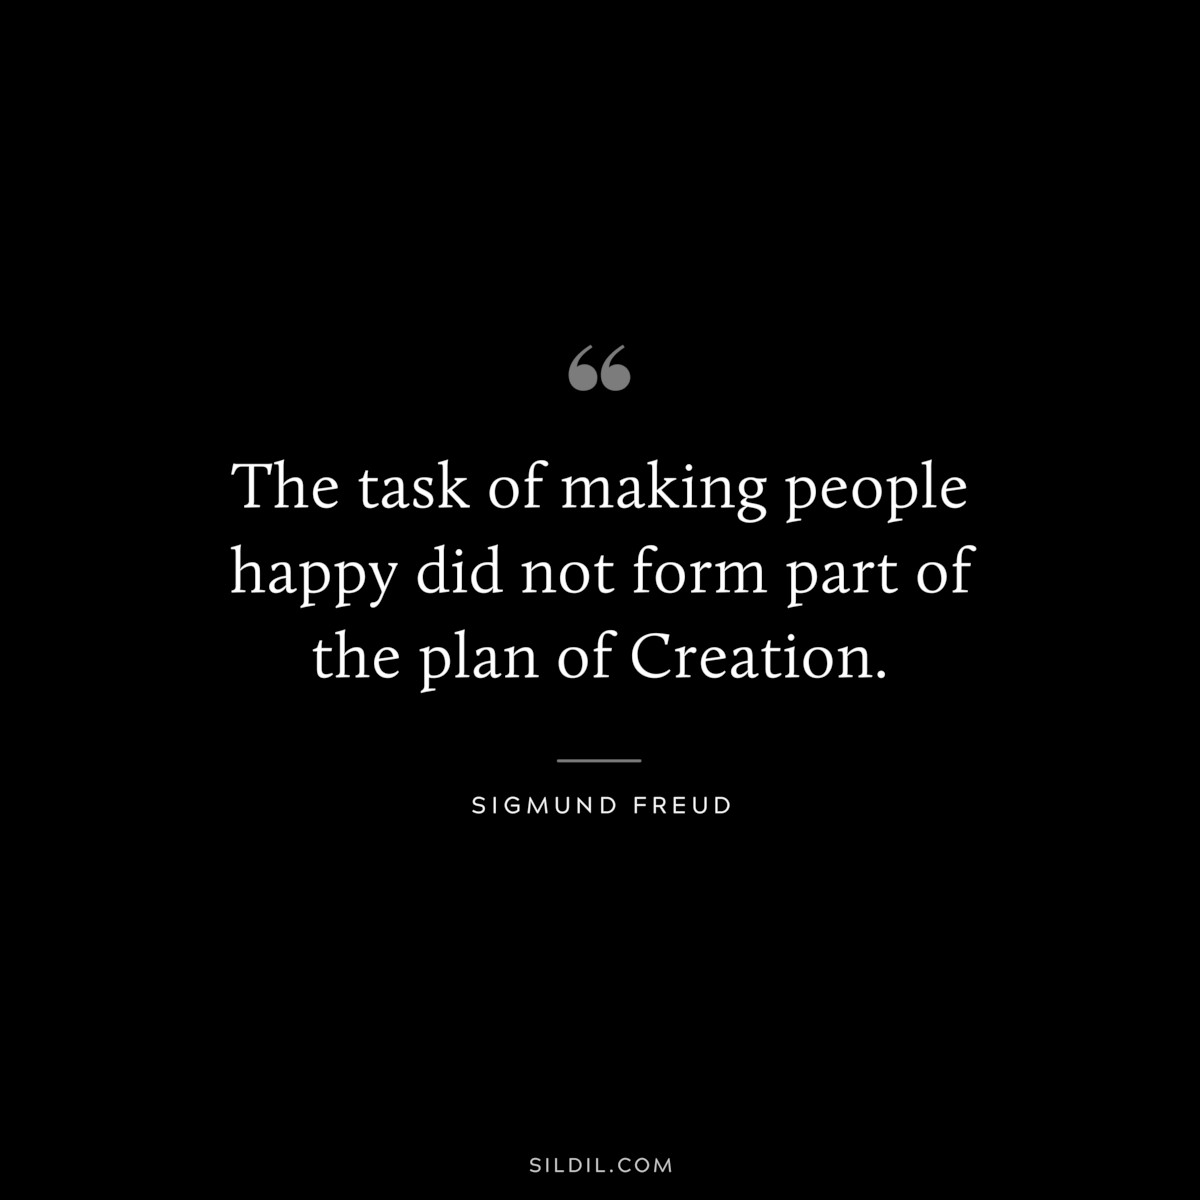 The task of making people happy did not form part of the plan of Creation. ― Sigmund Frued